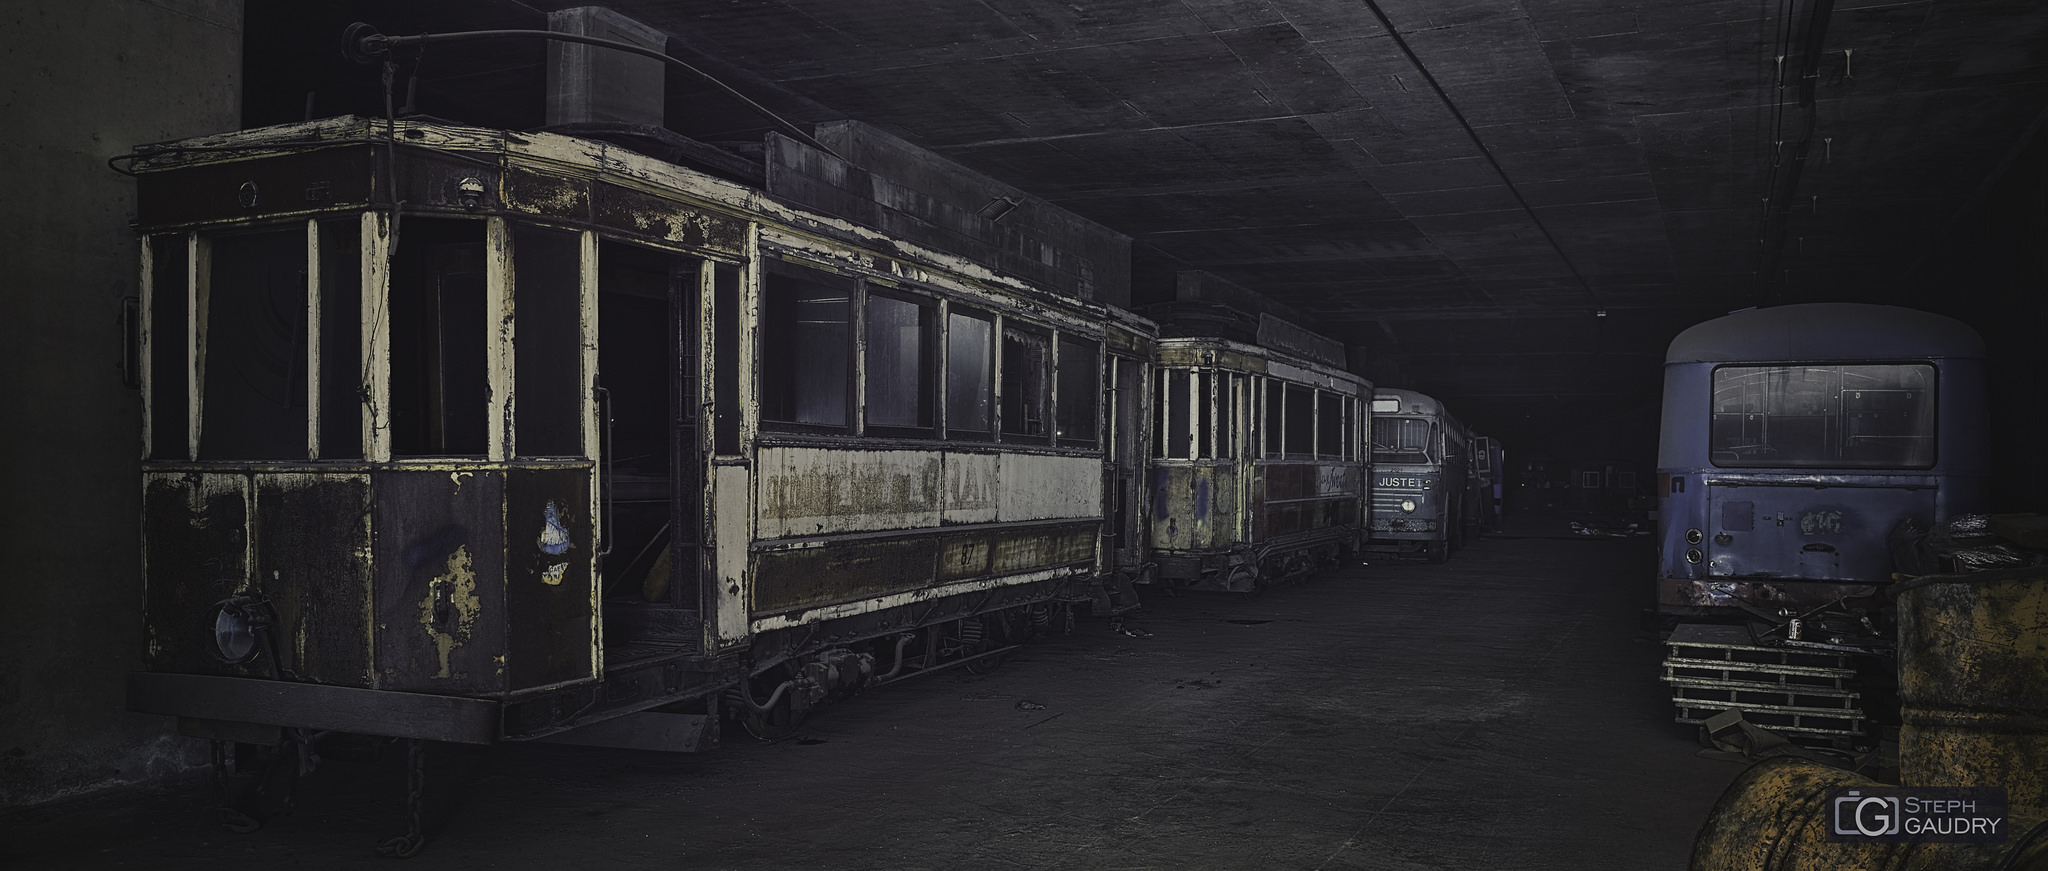 On the road again / The abandoned streetcars